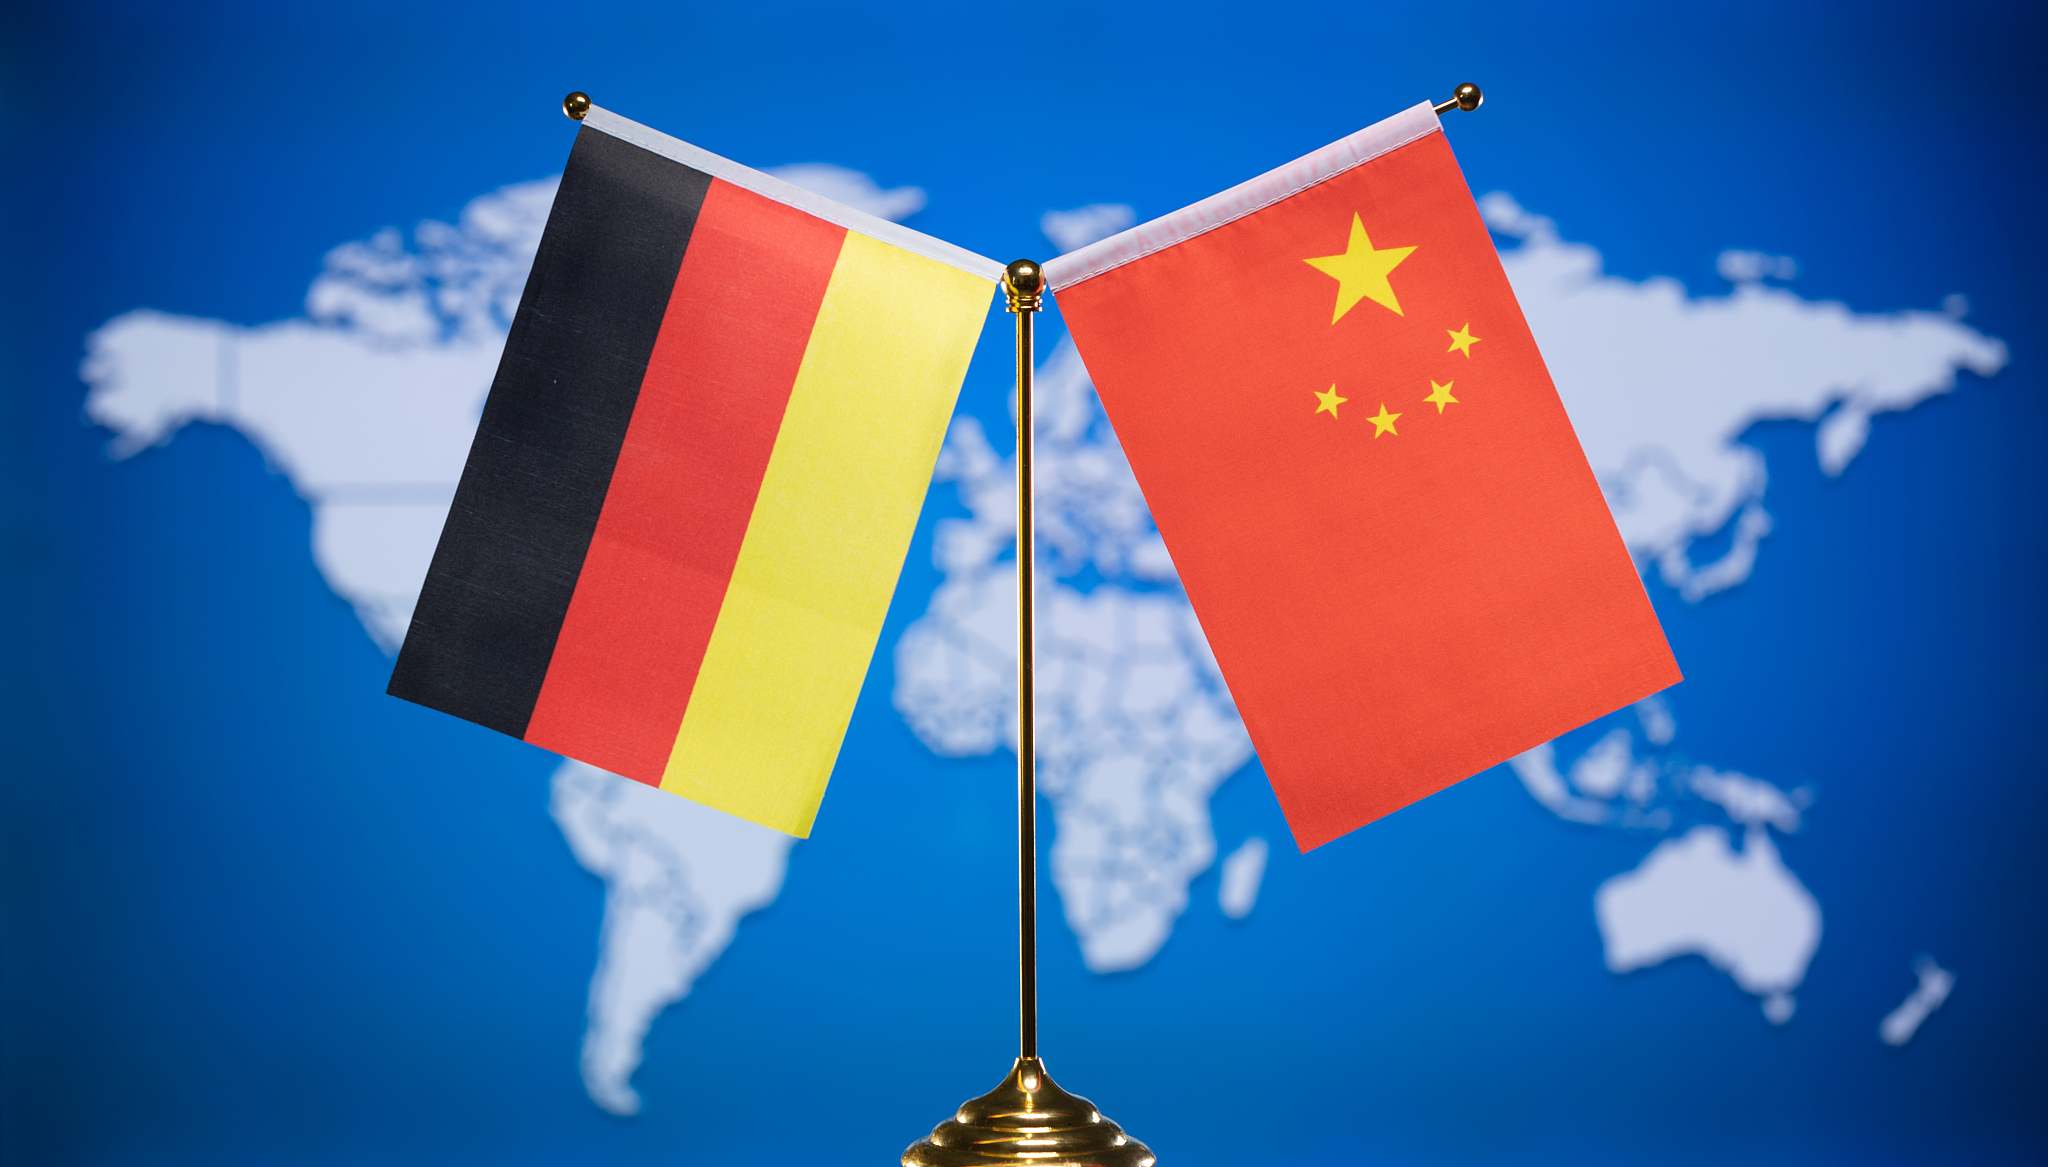 Germany takes the China challenge - CGTN